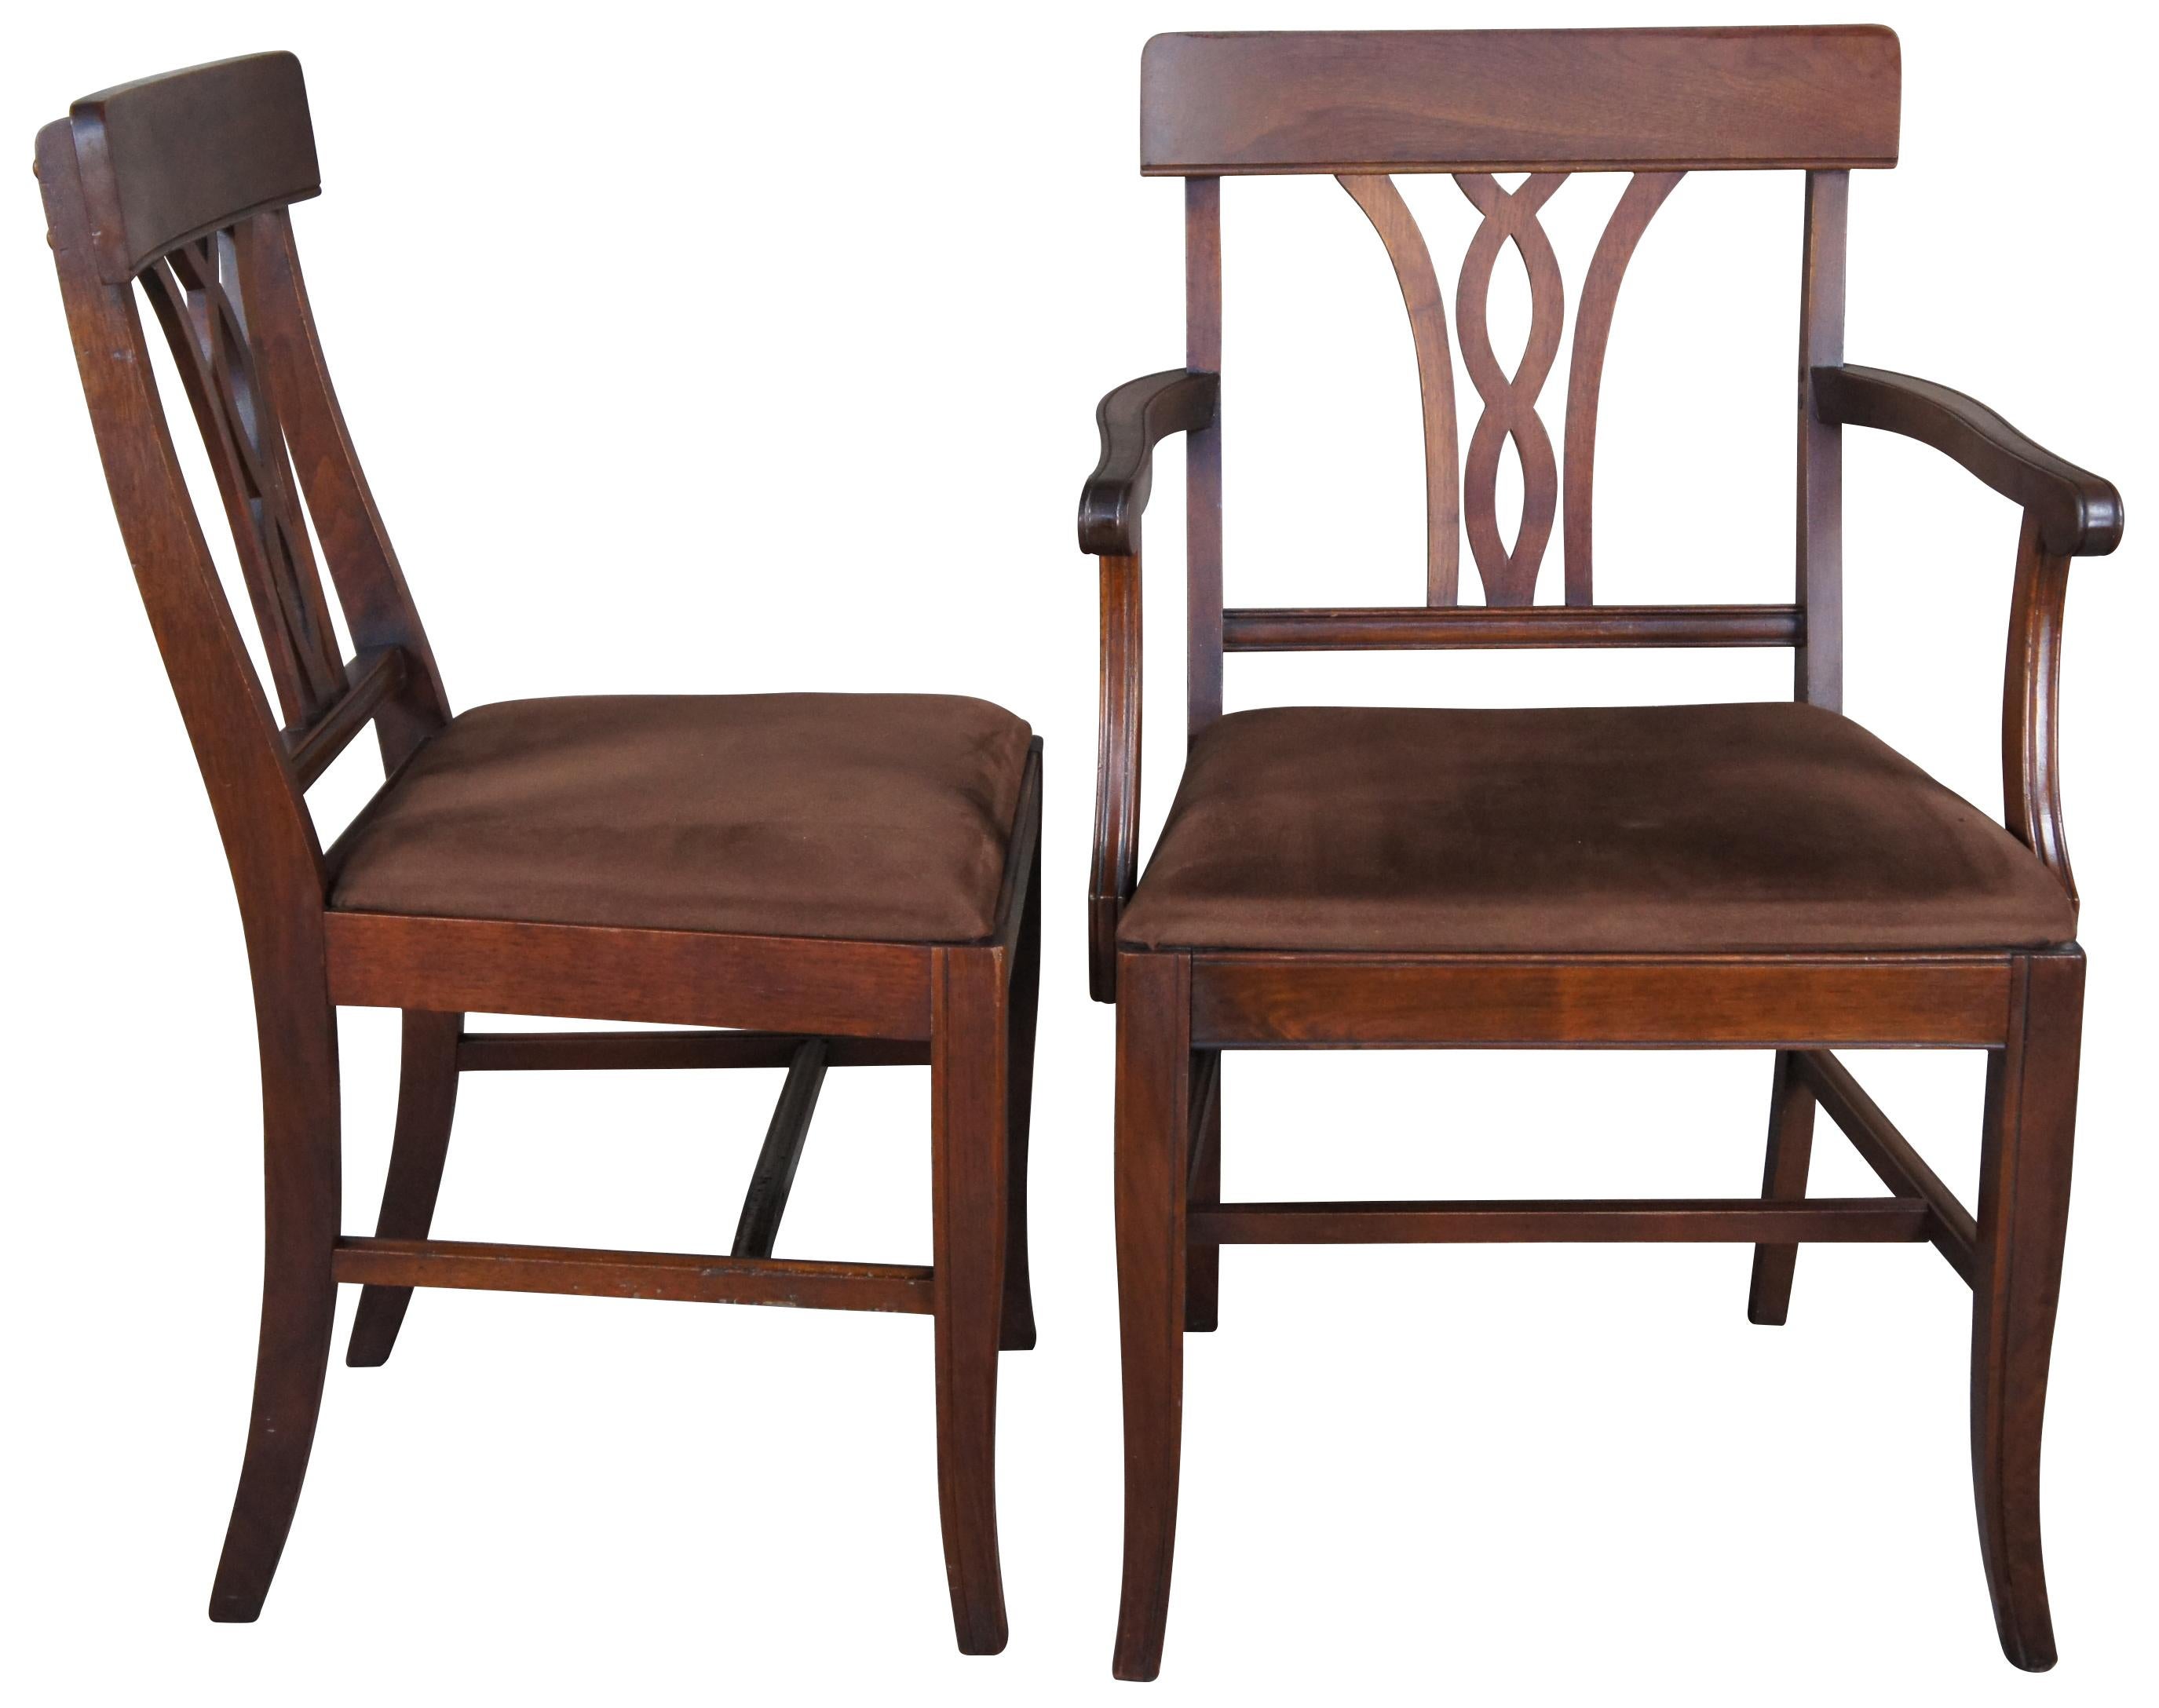 6 early 20th century dining chairs. Made from walnut with a curved crest rail over interlaced back splat and brown suede seat.

Measures: 23